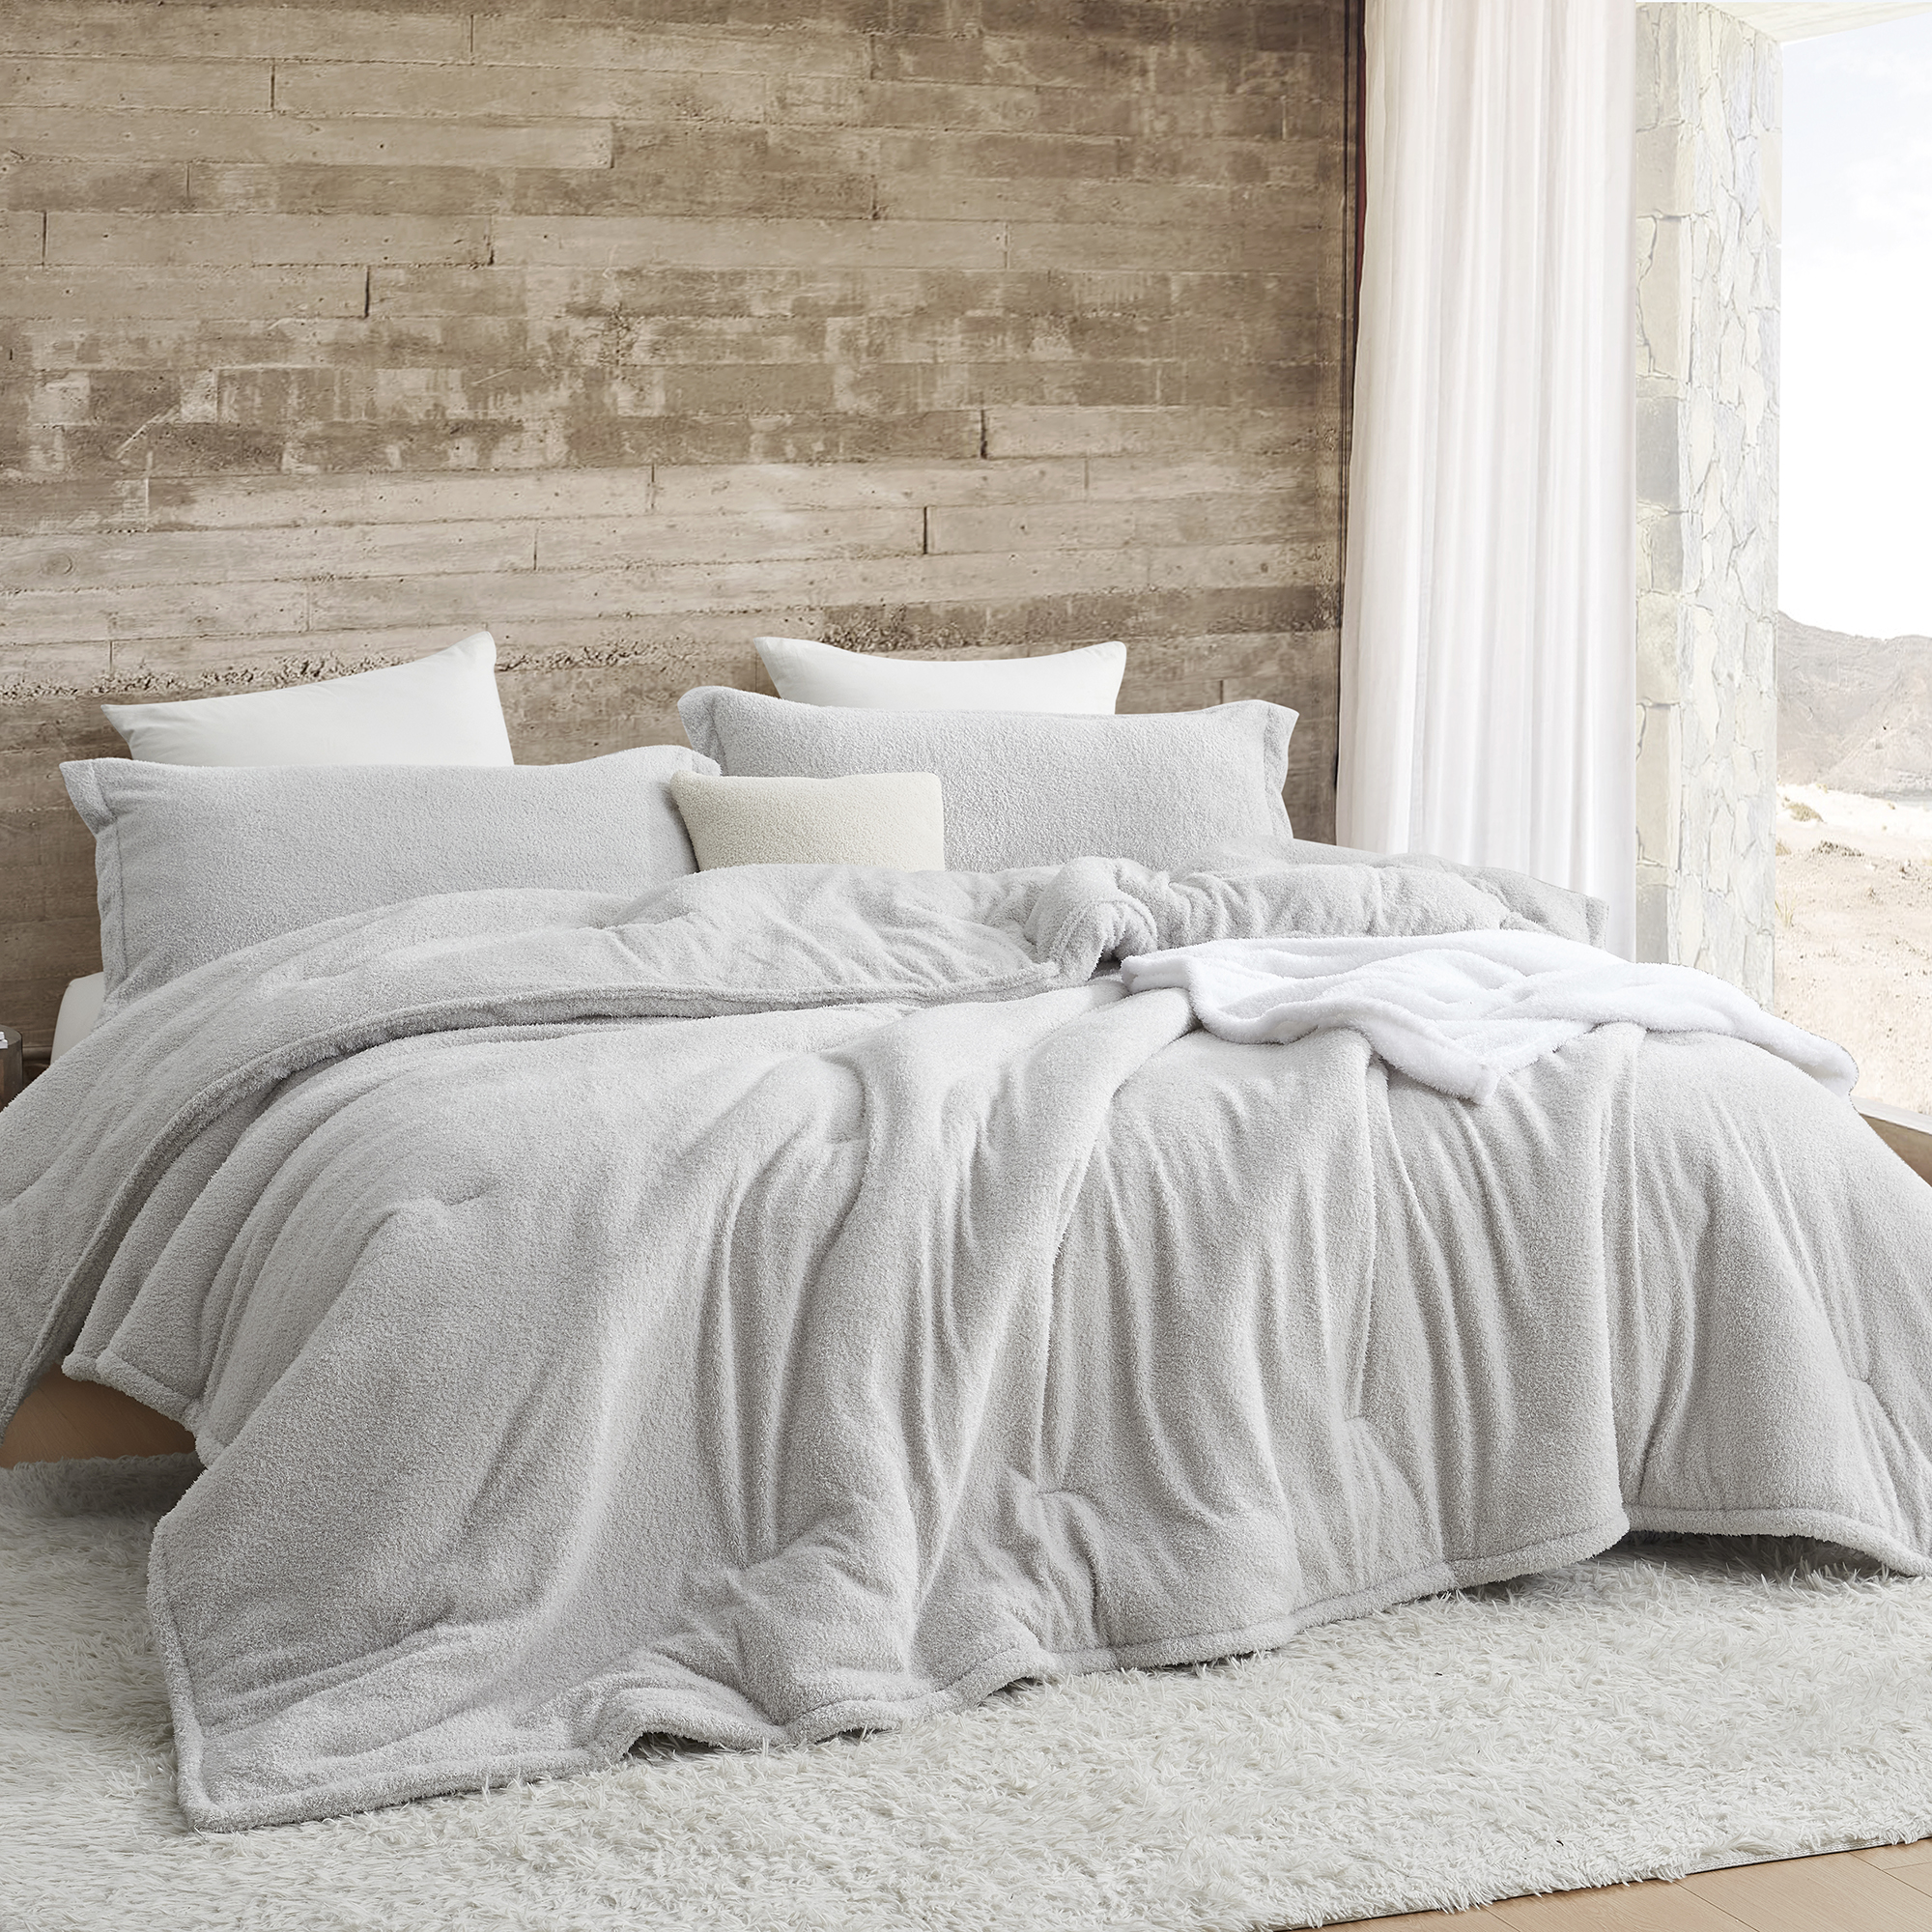 Cozy Moody - Coma Inducer® Oversized Queen Comforter - Light Gray